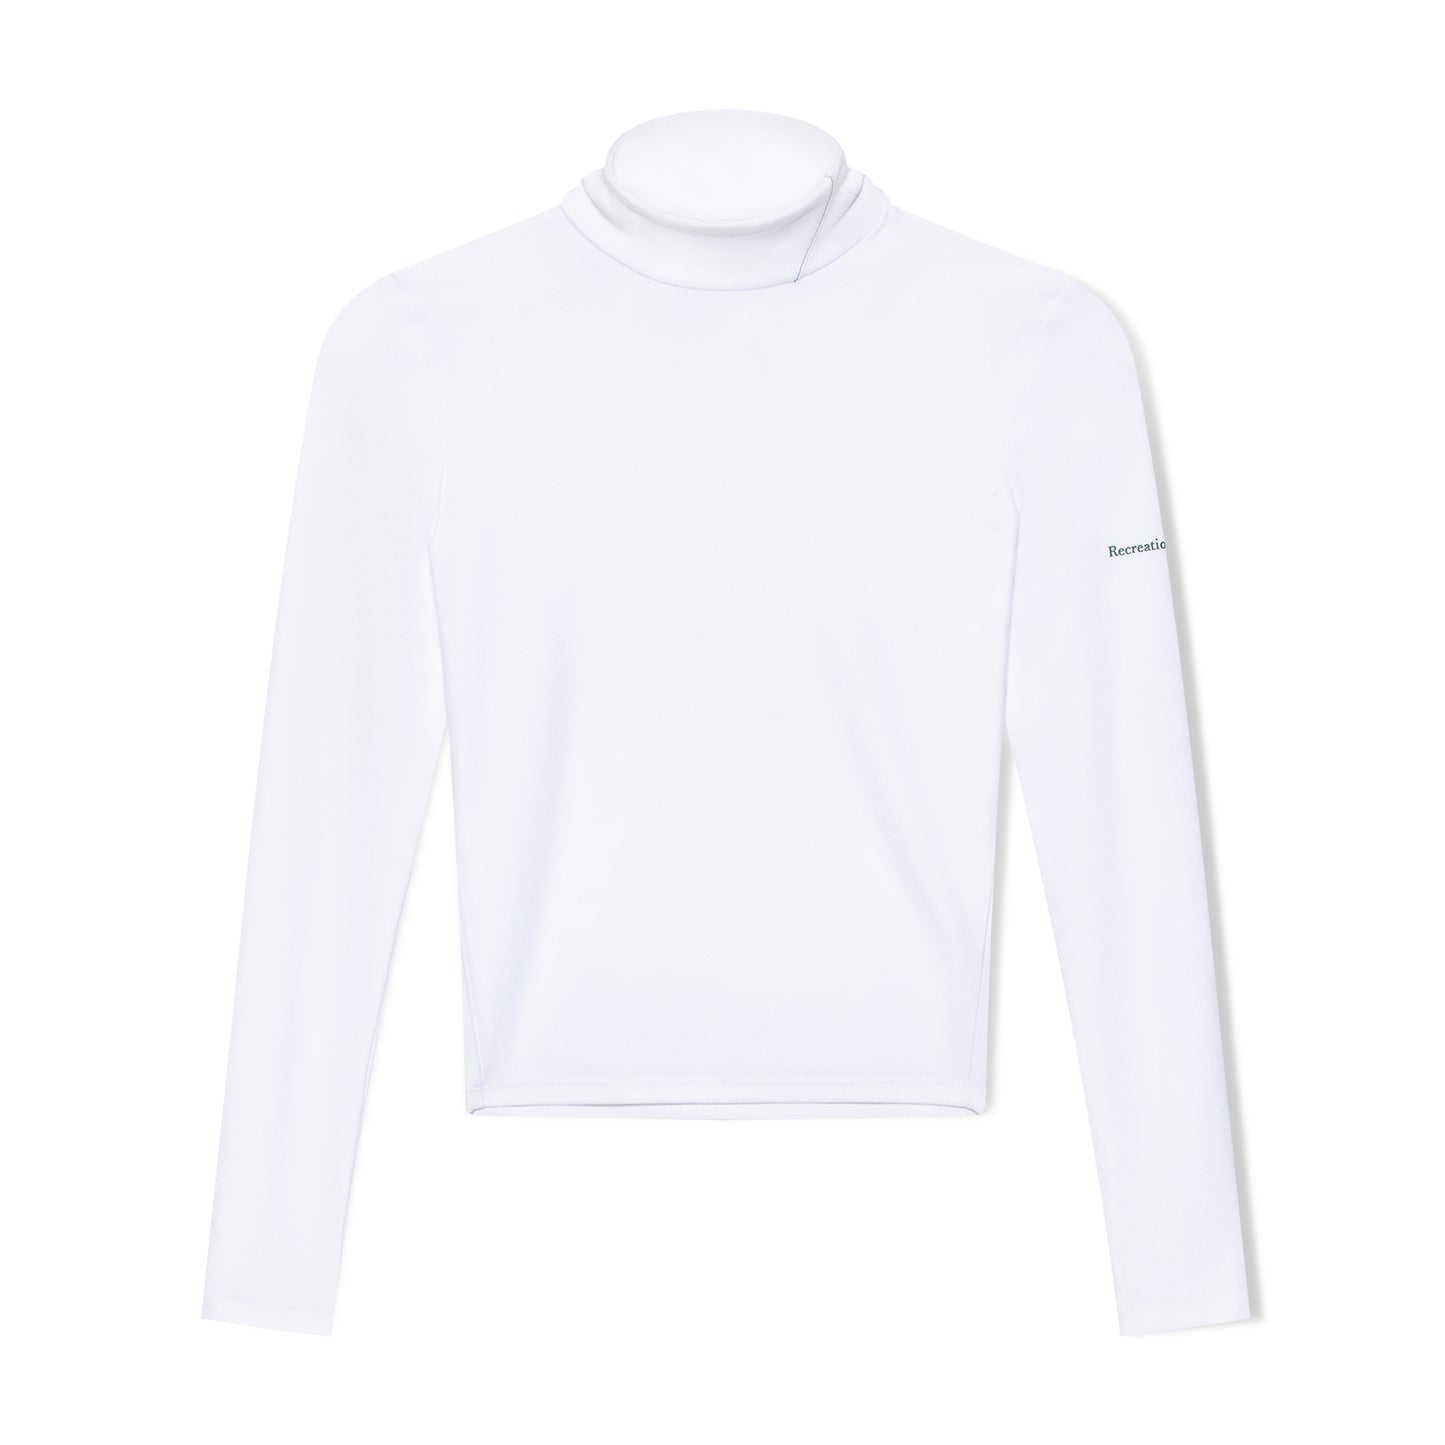 Daisy Insulated Top in White